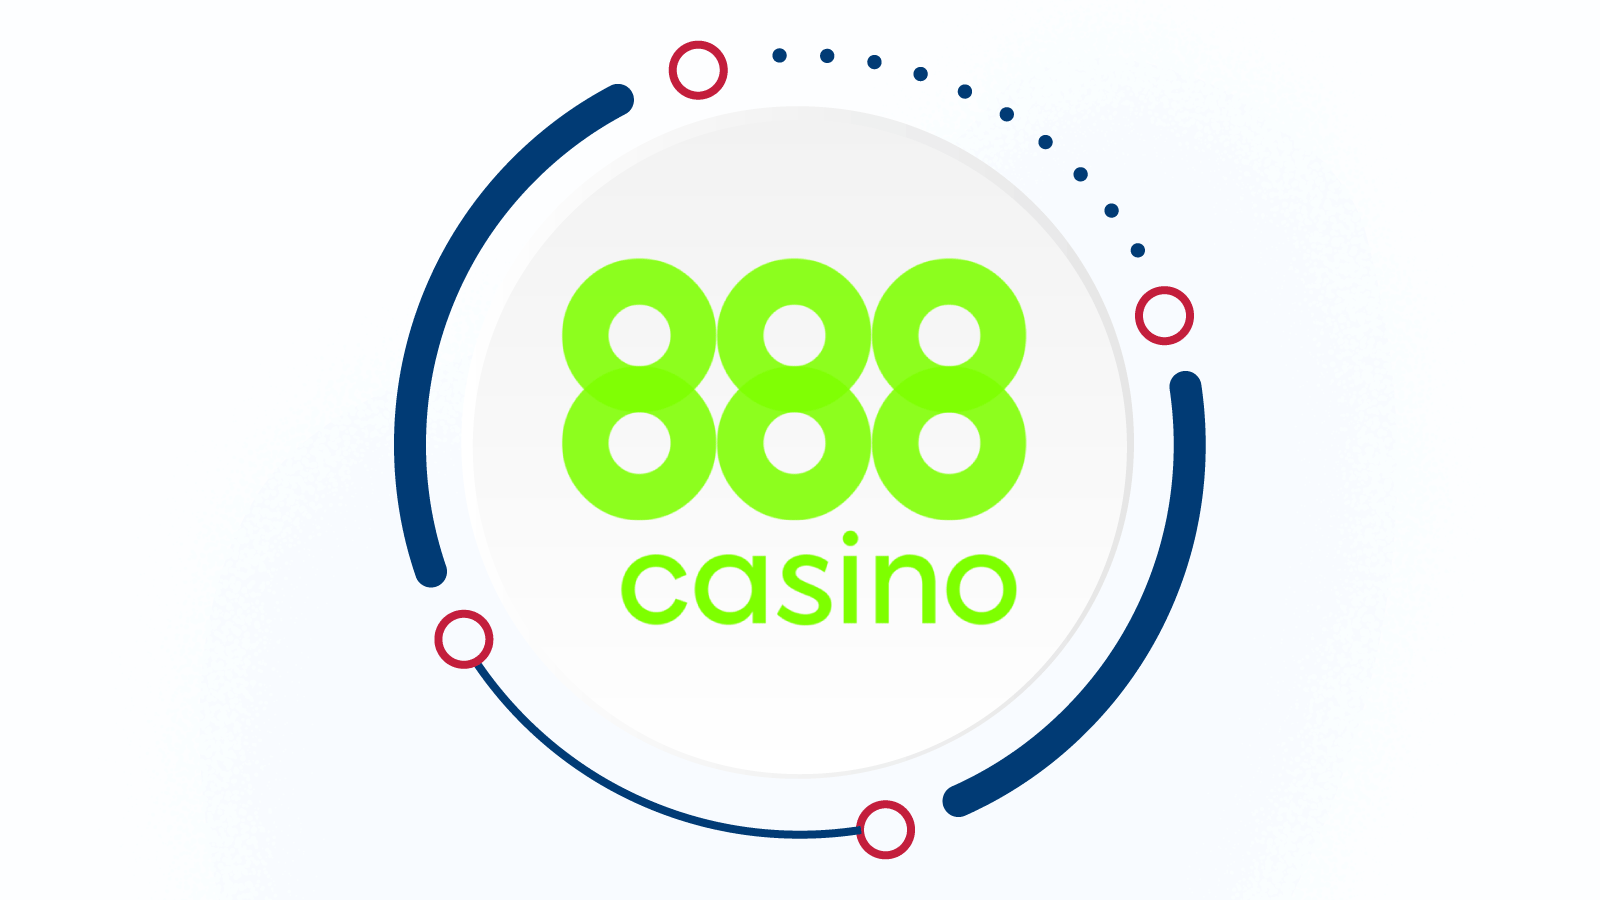 The site he describes in articles about online casino: an important article